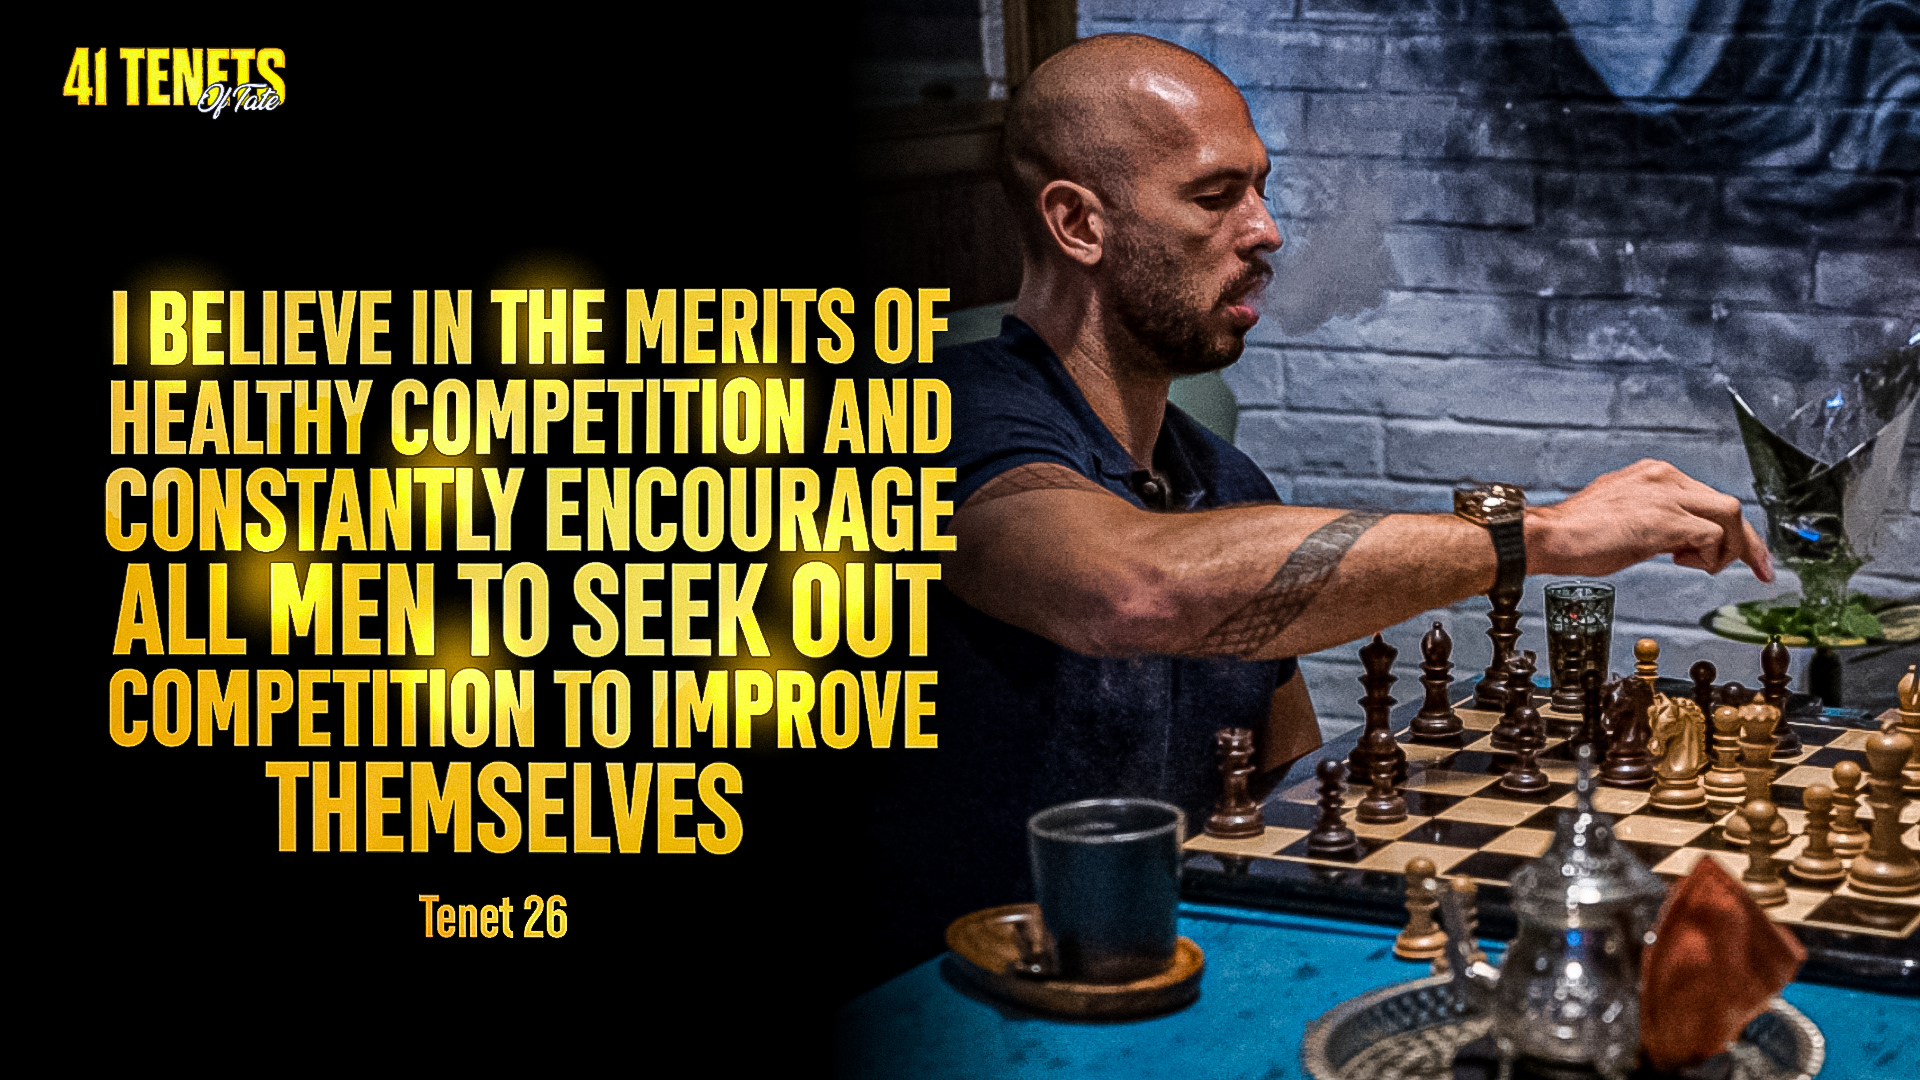 ▷ Andrew tate chess: An impressive strong chess player since 2015.